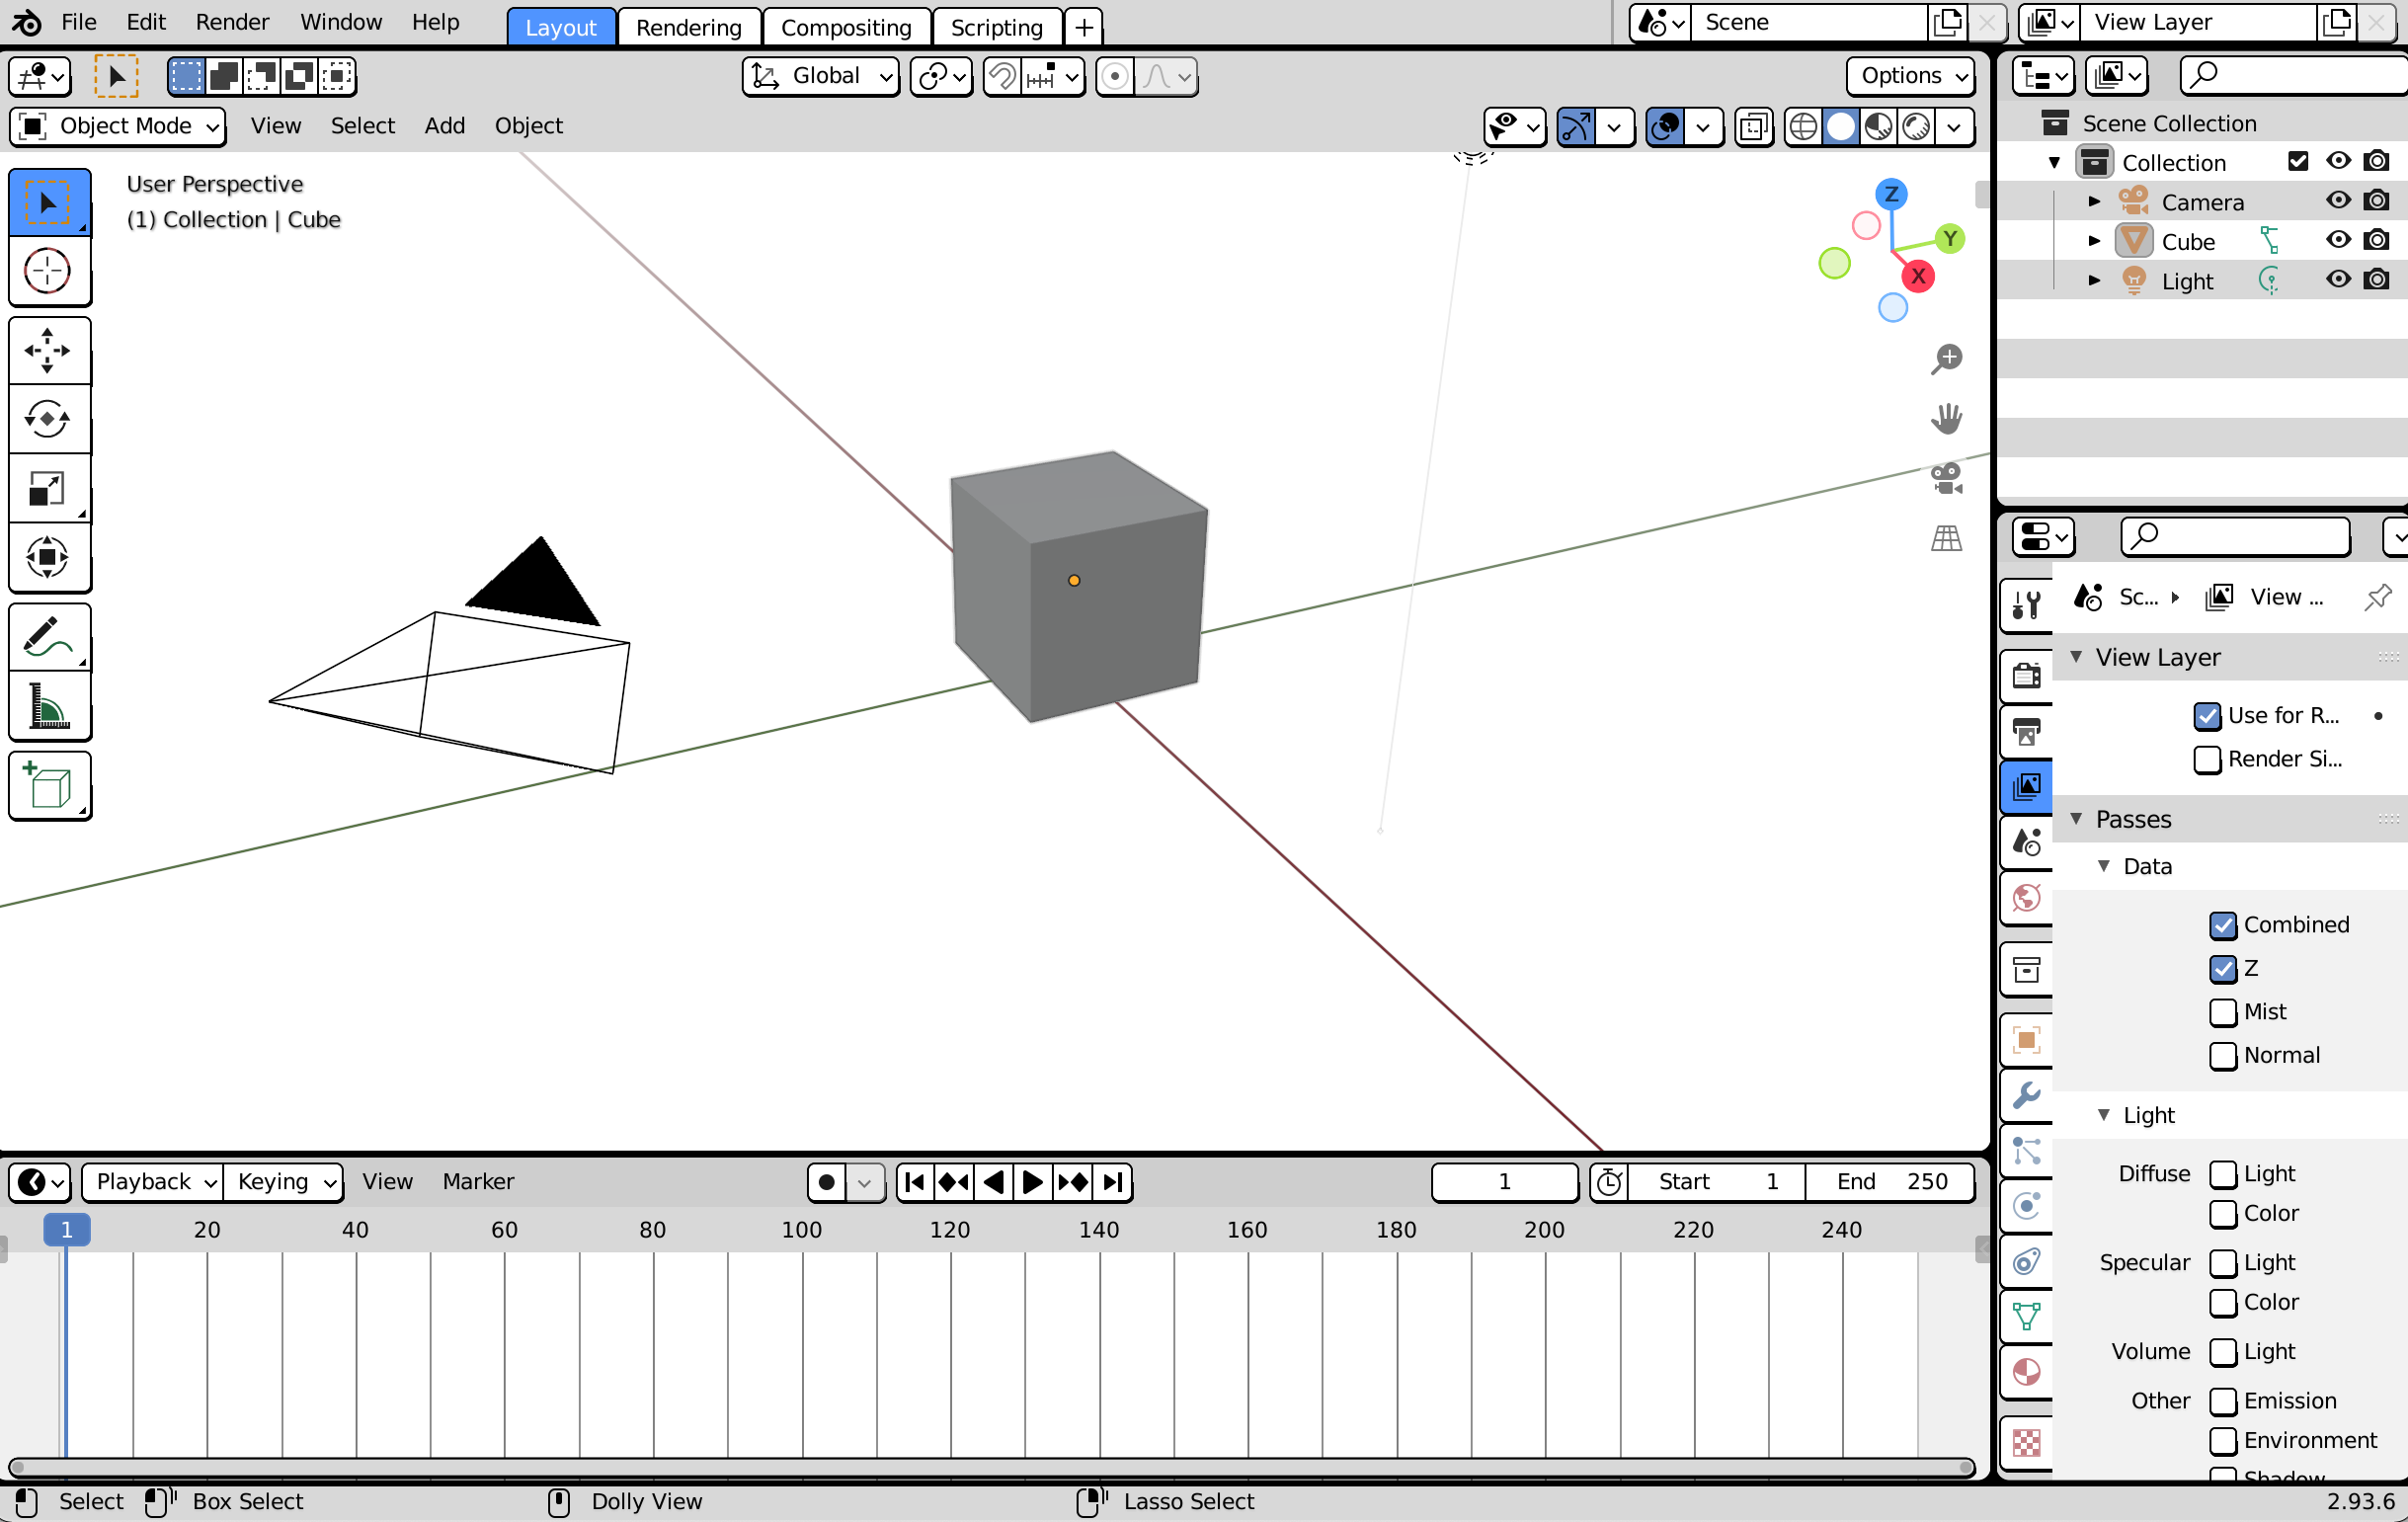 Layout tab in Blender showing the 3D scene layout.